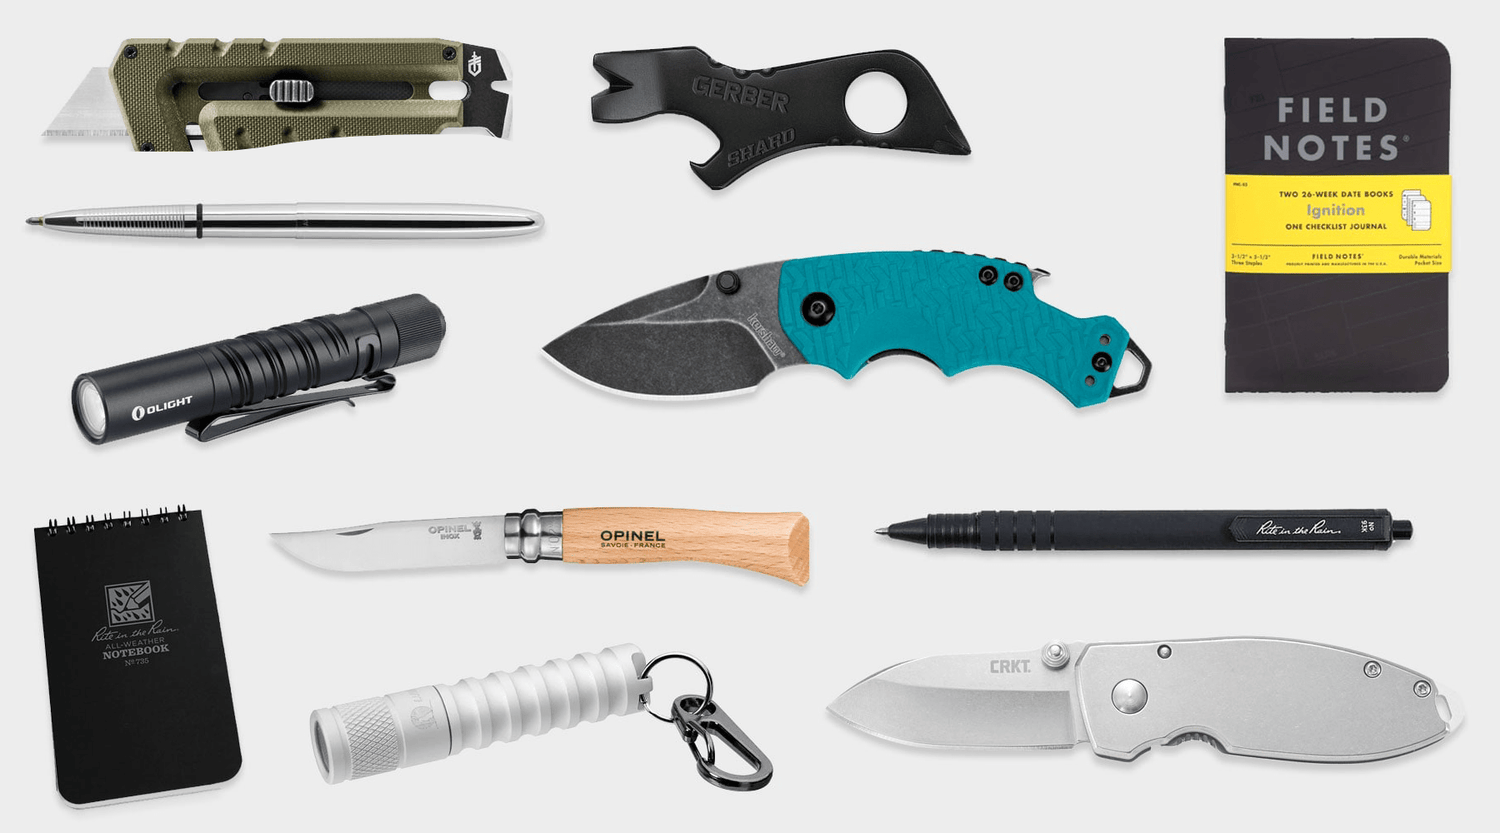 15 Best Budget EDC (Everyday Carry) Gear Options Under $35